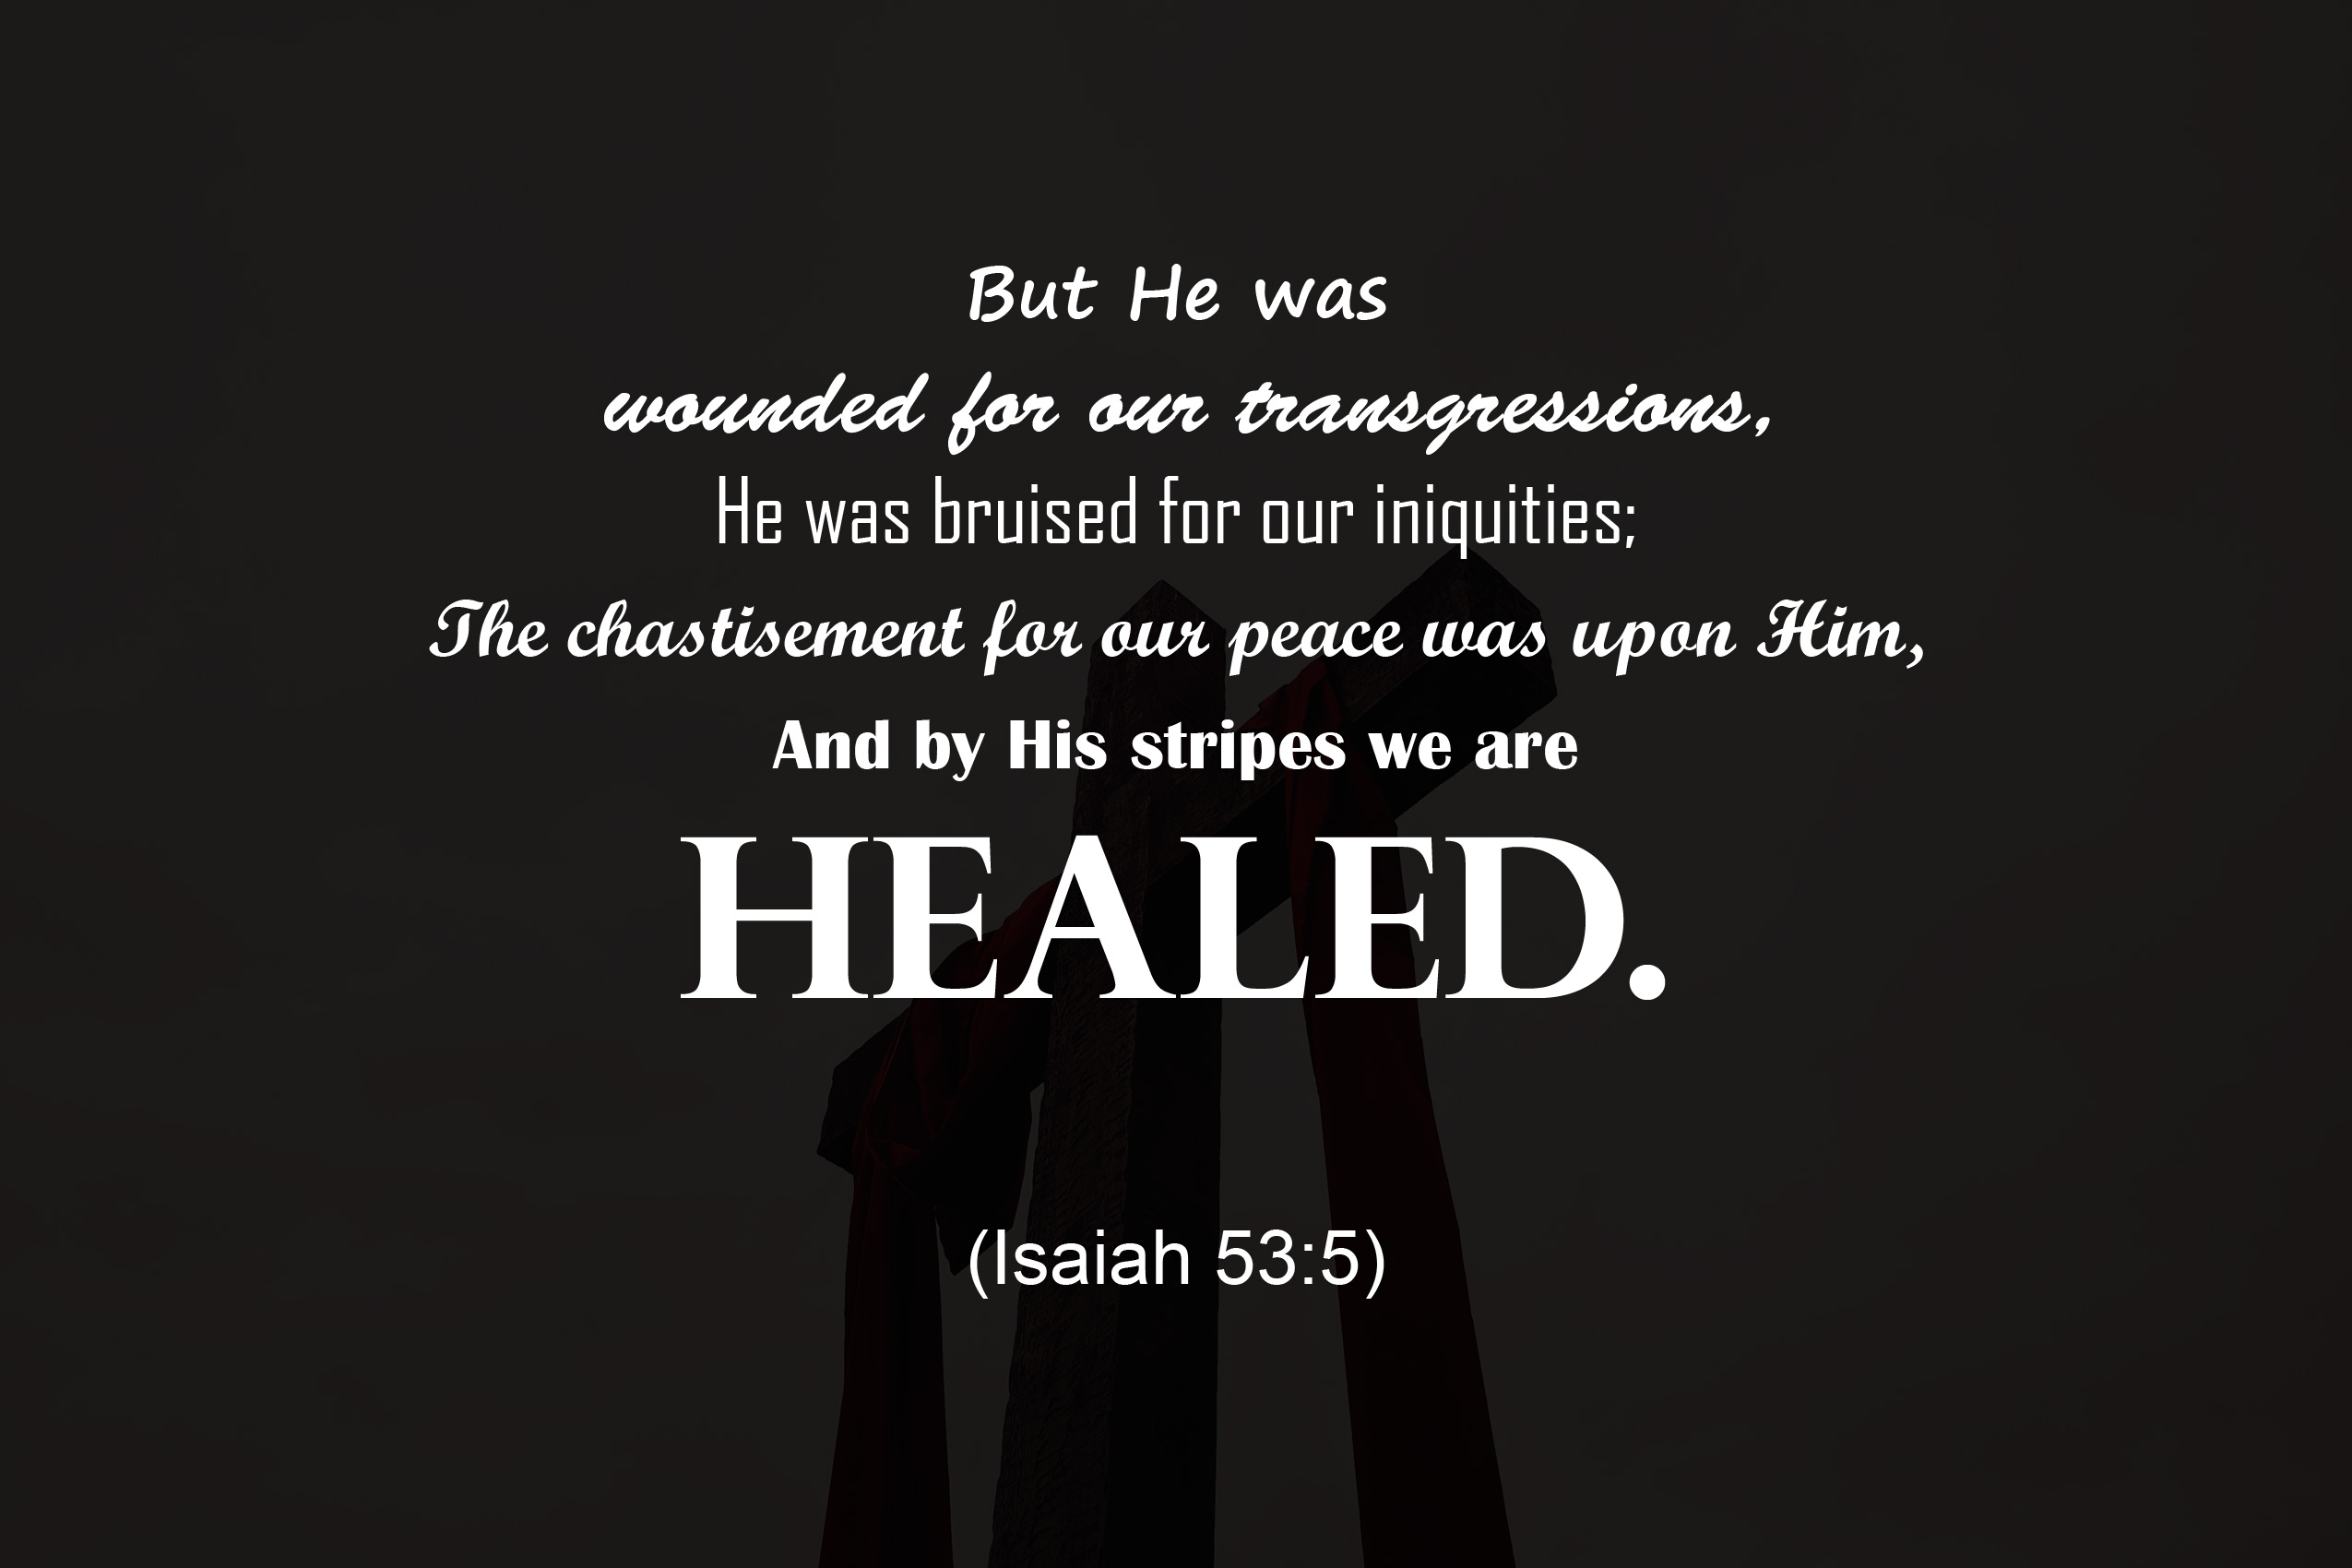 by his stripes we are healed bible verse